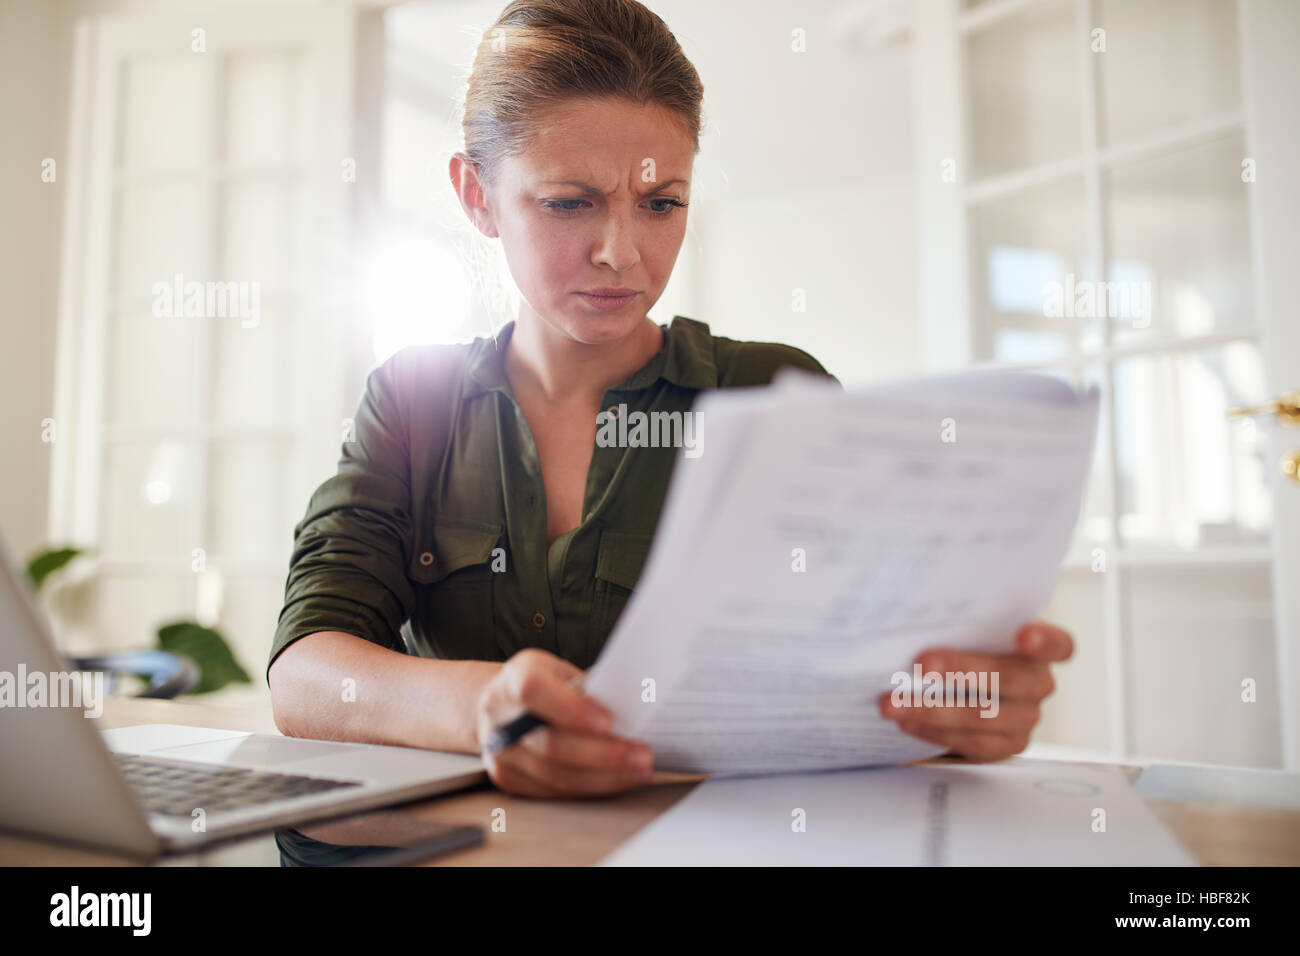 Portrait of young female sitting at table reading documents. Woman busy working at home office. Stock Photo